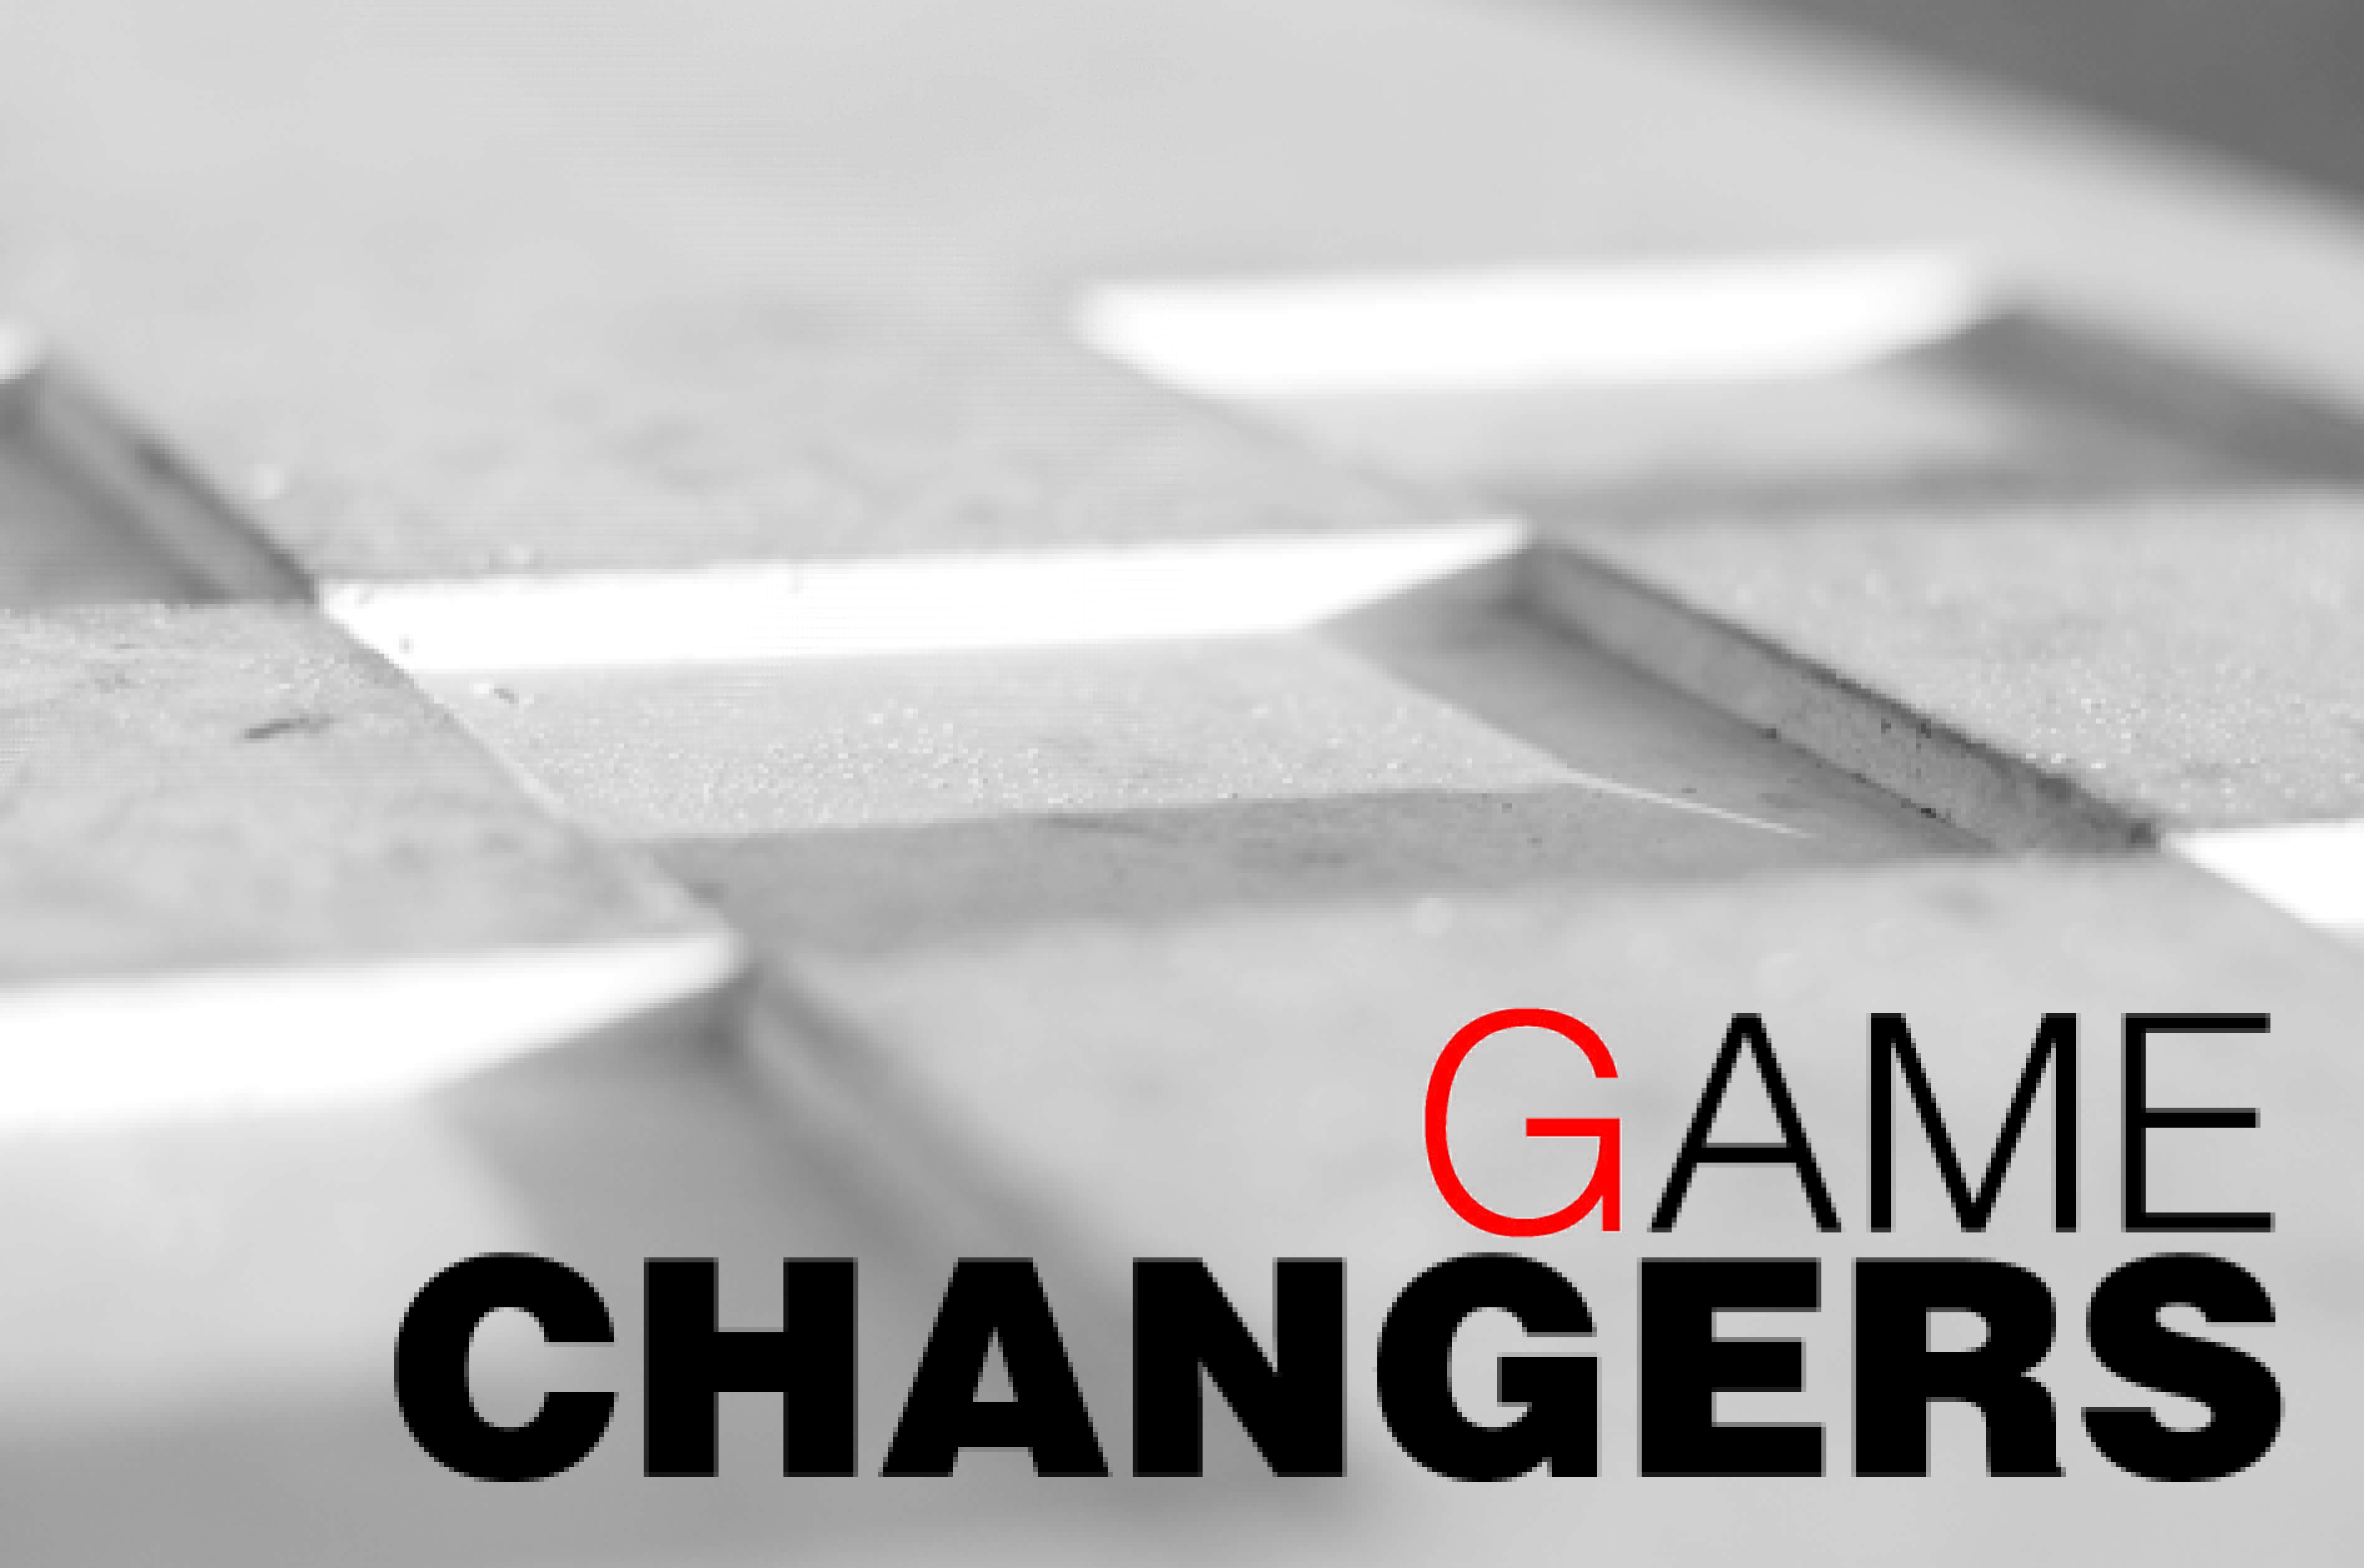 The Game Changers in Movie Theaters | Fathom Events